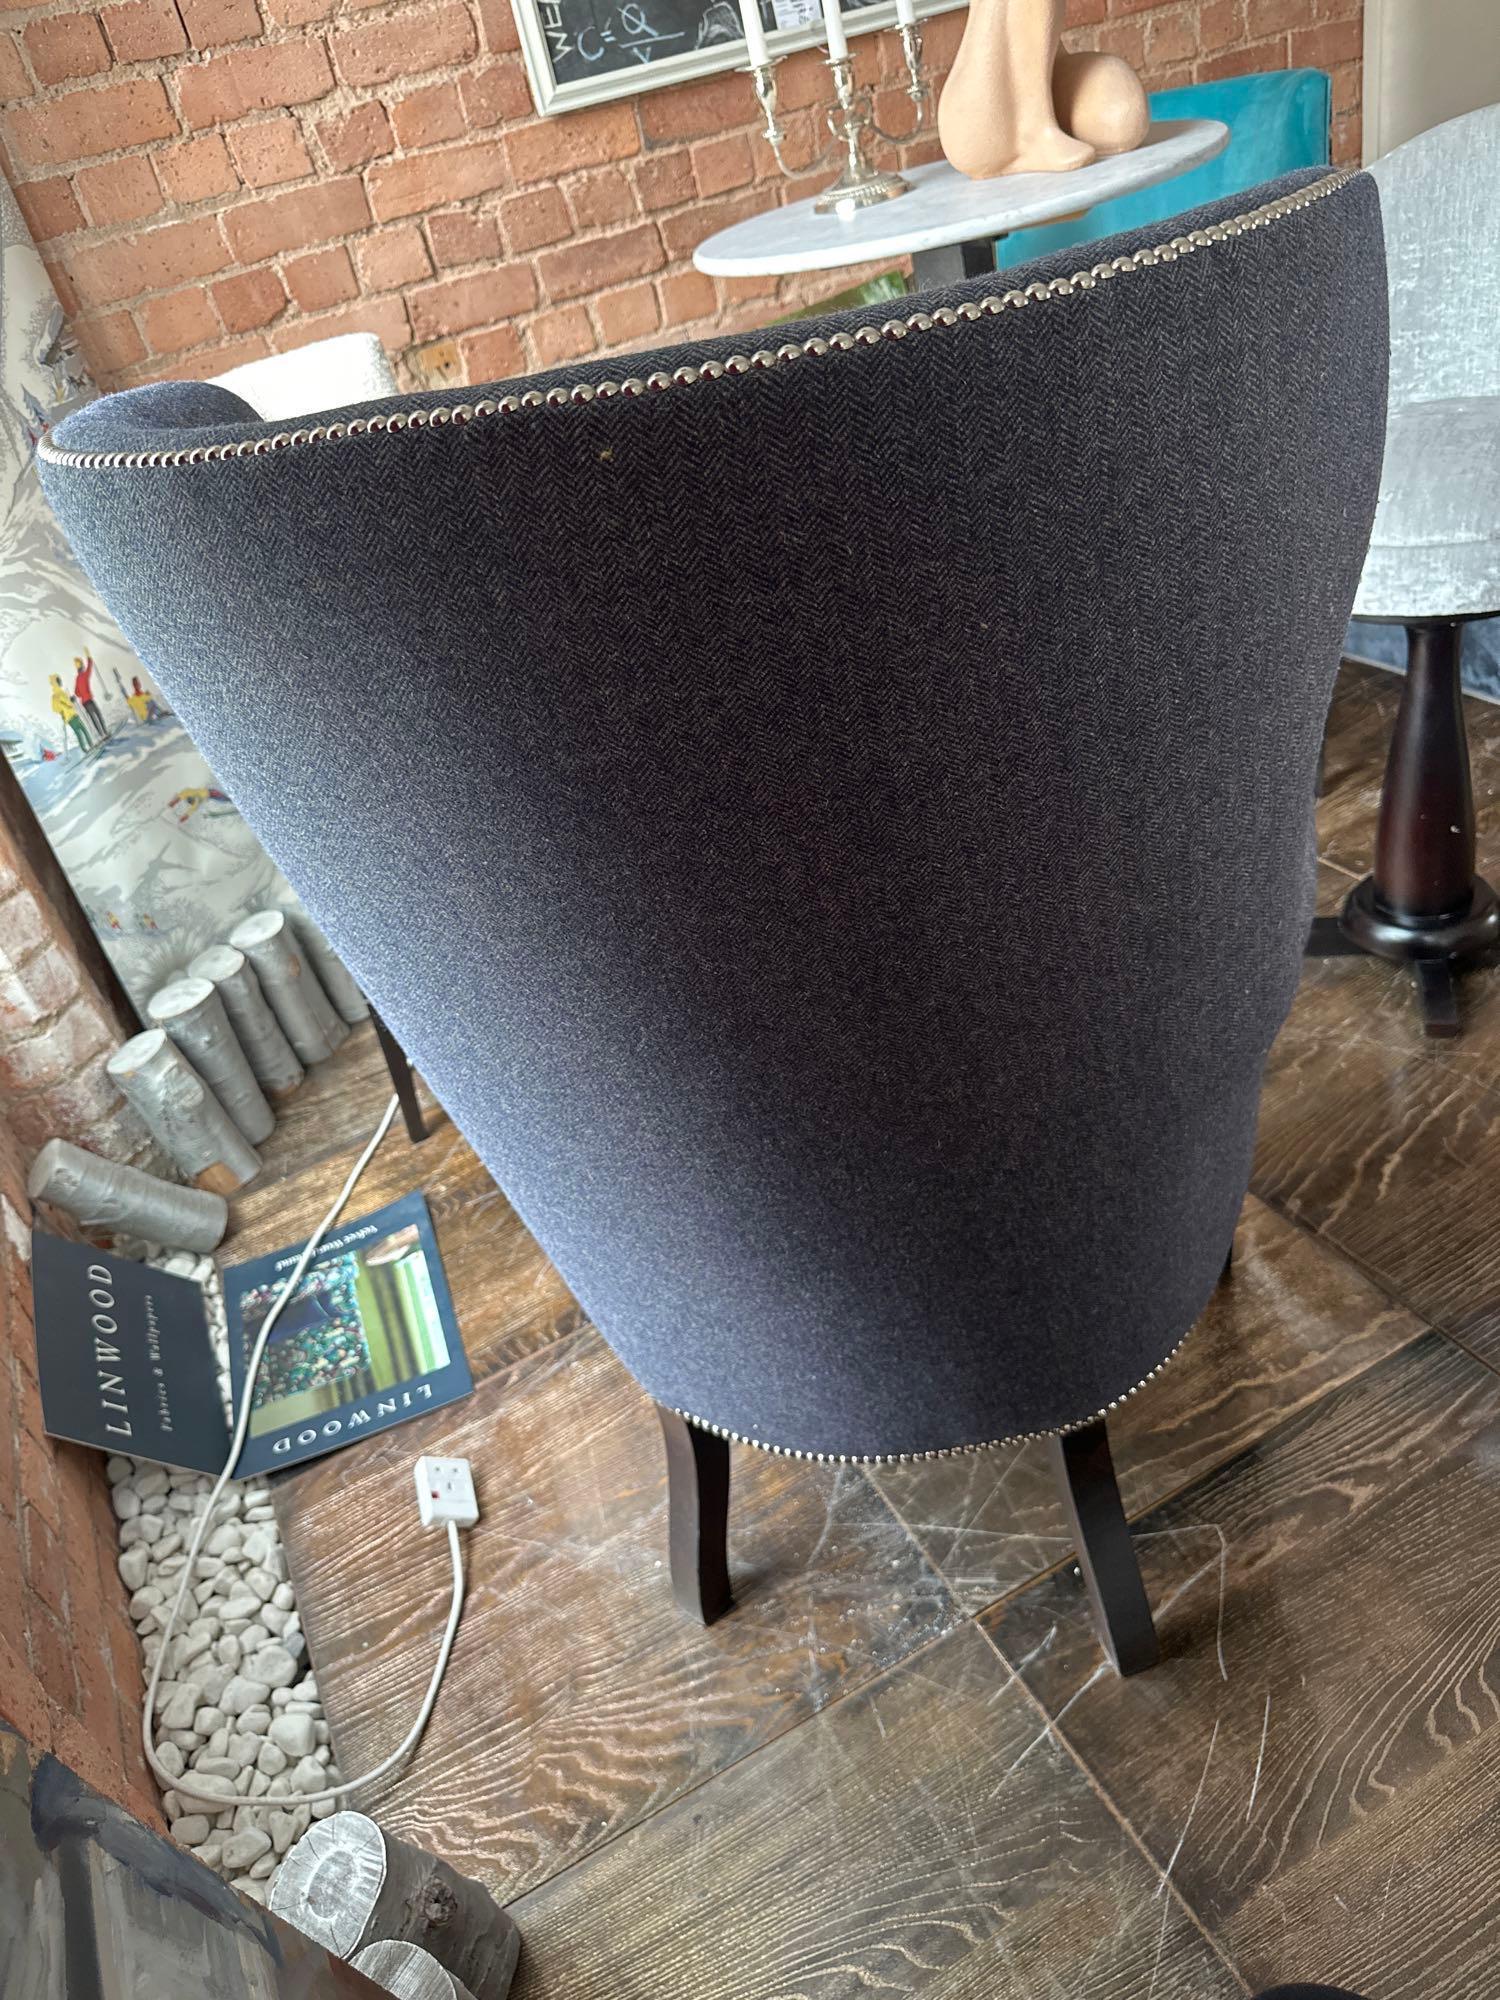 Barrel High Curved Back Wing Chair The Barrel High Curved Back Wing Chair Boasts A Distinctive - Image 5 of 5